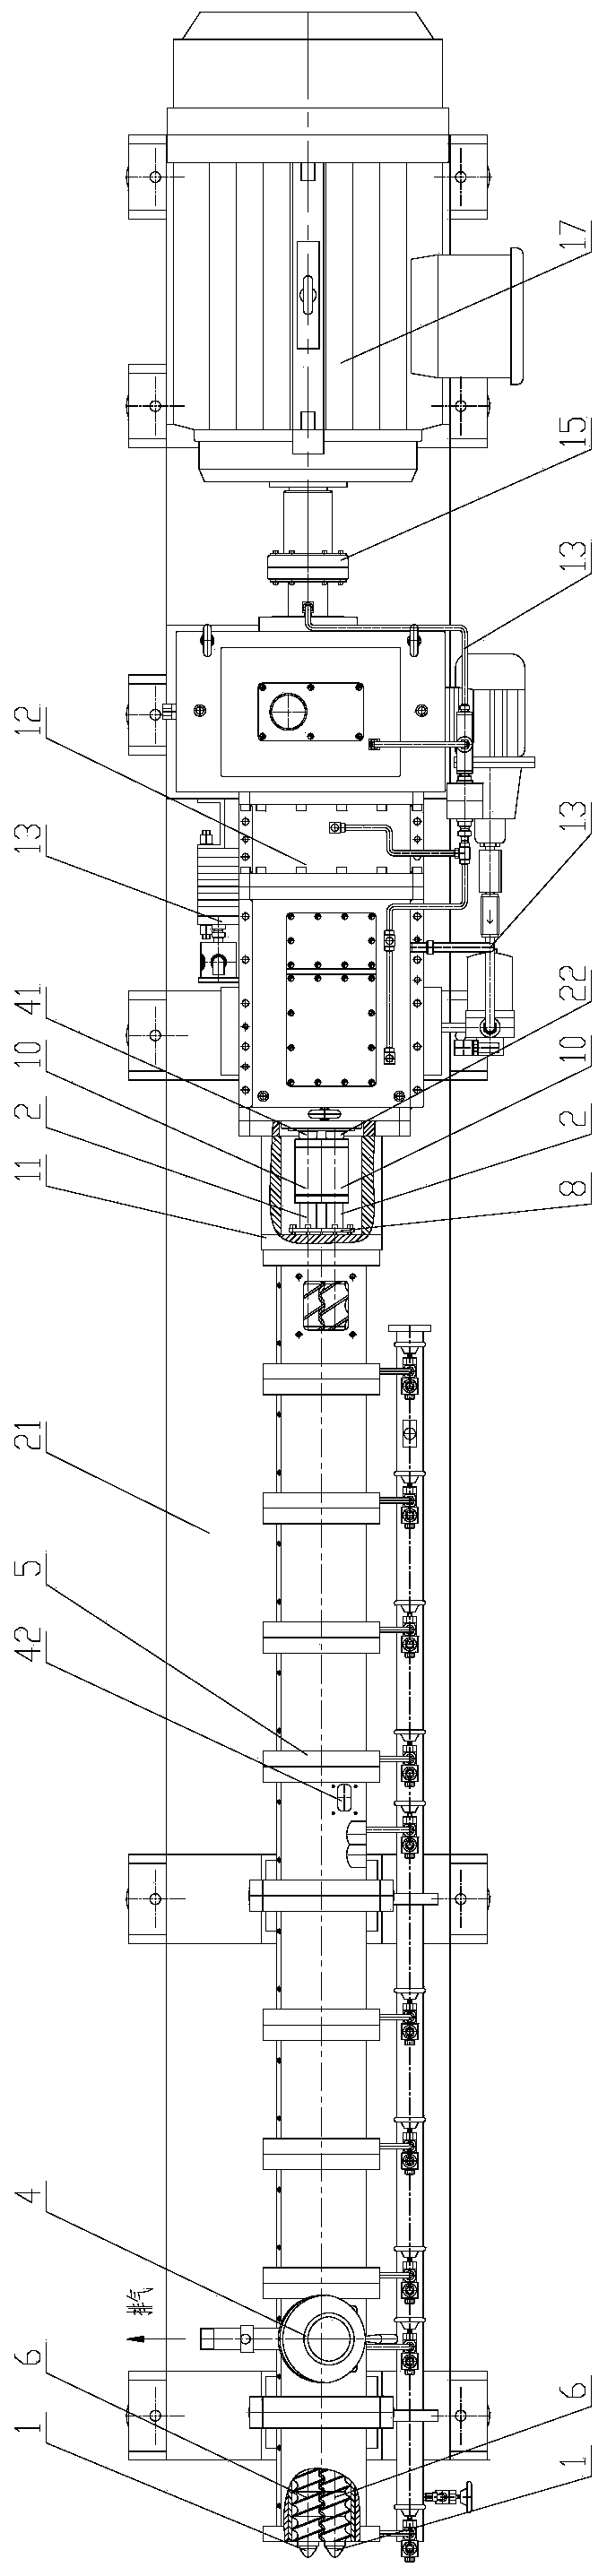 Structure of homonymous parallel double-screw-rod extrusion machine